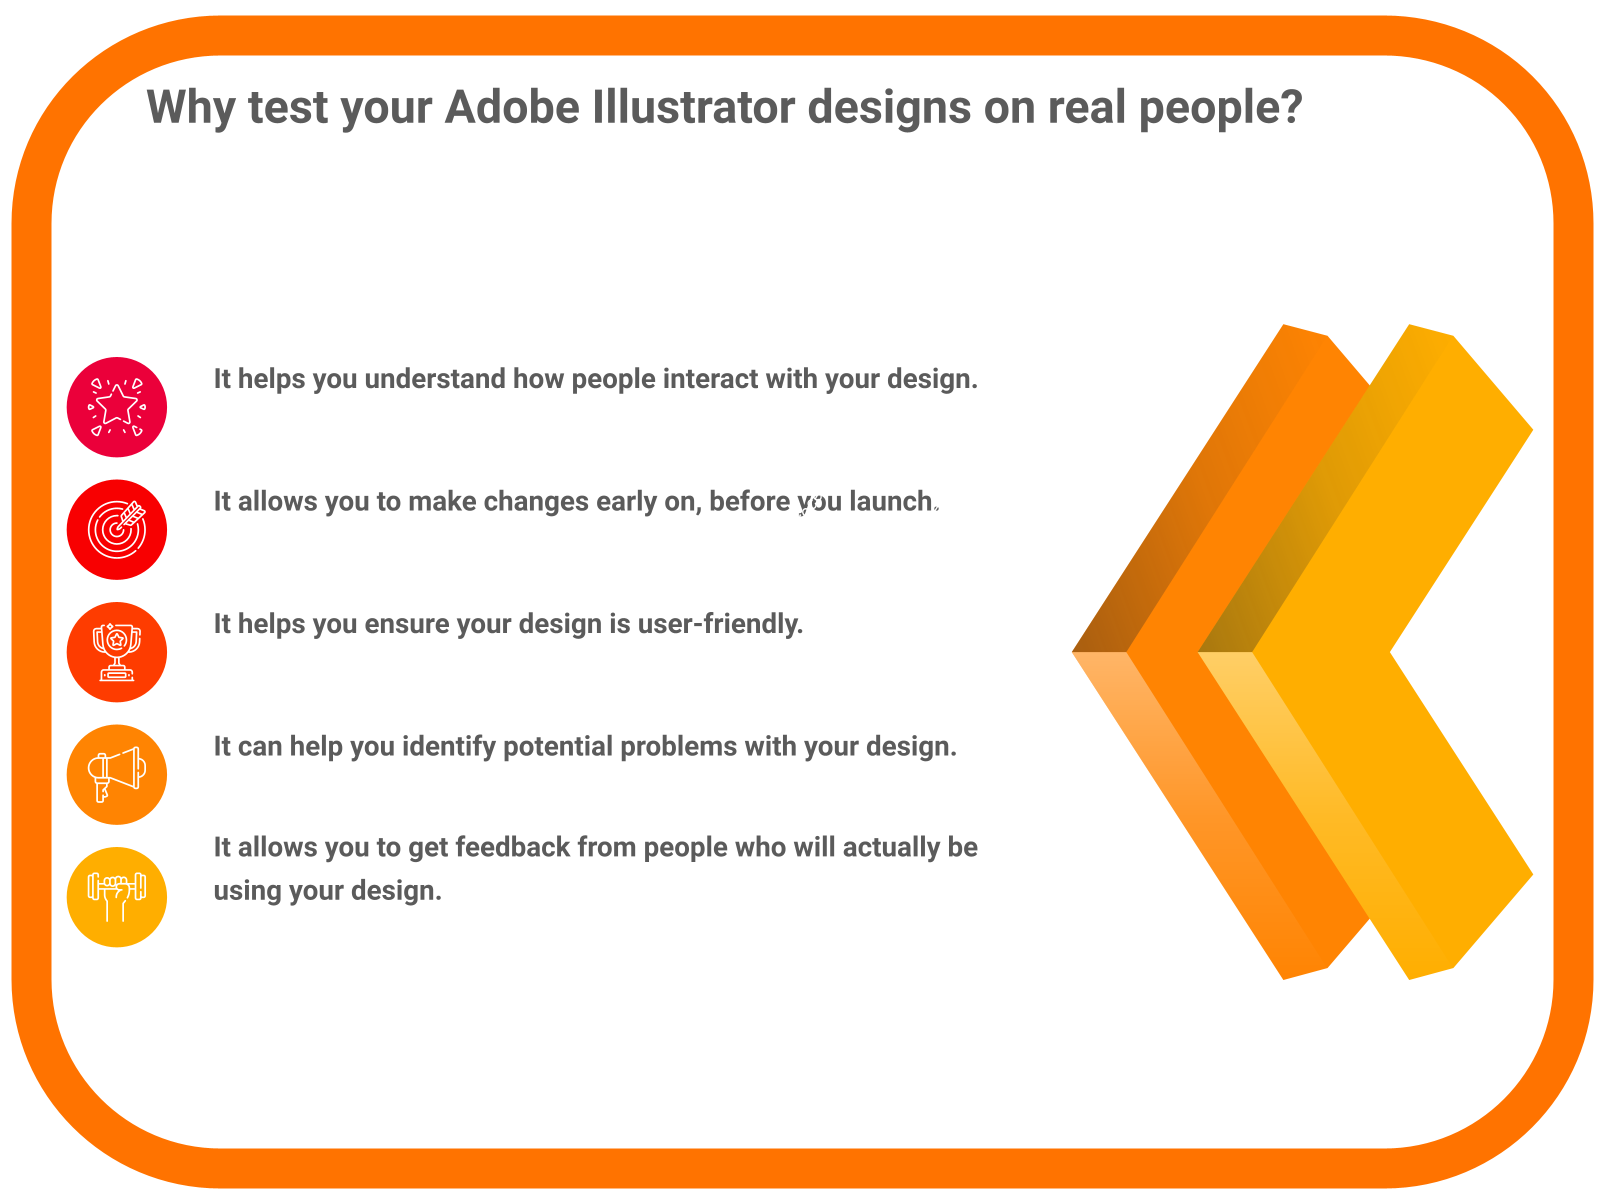 Why test your Adobe Illustrator designs on real people?